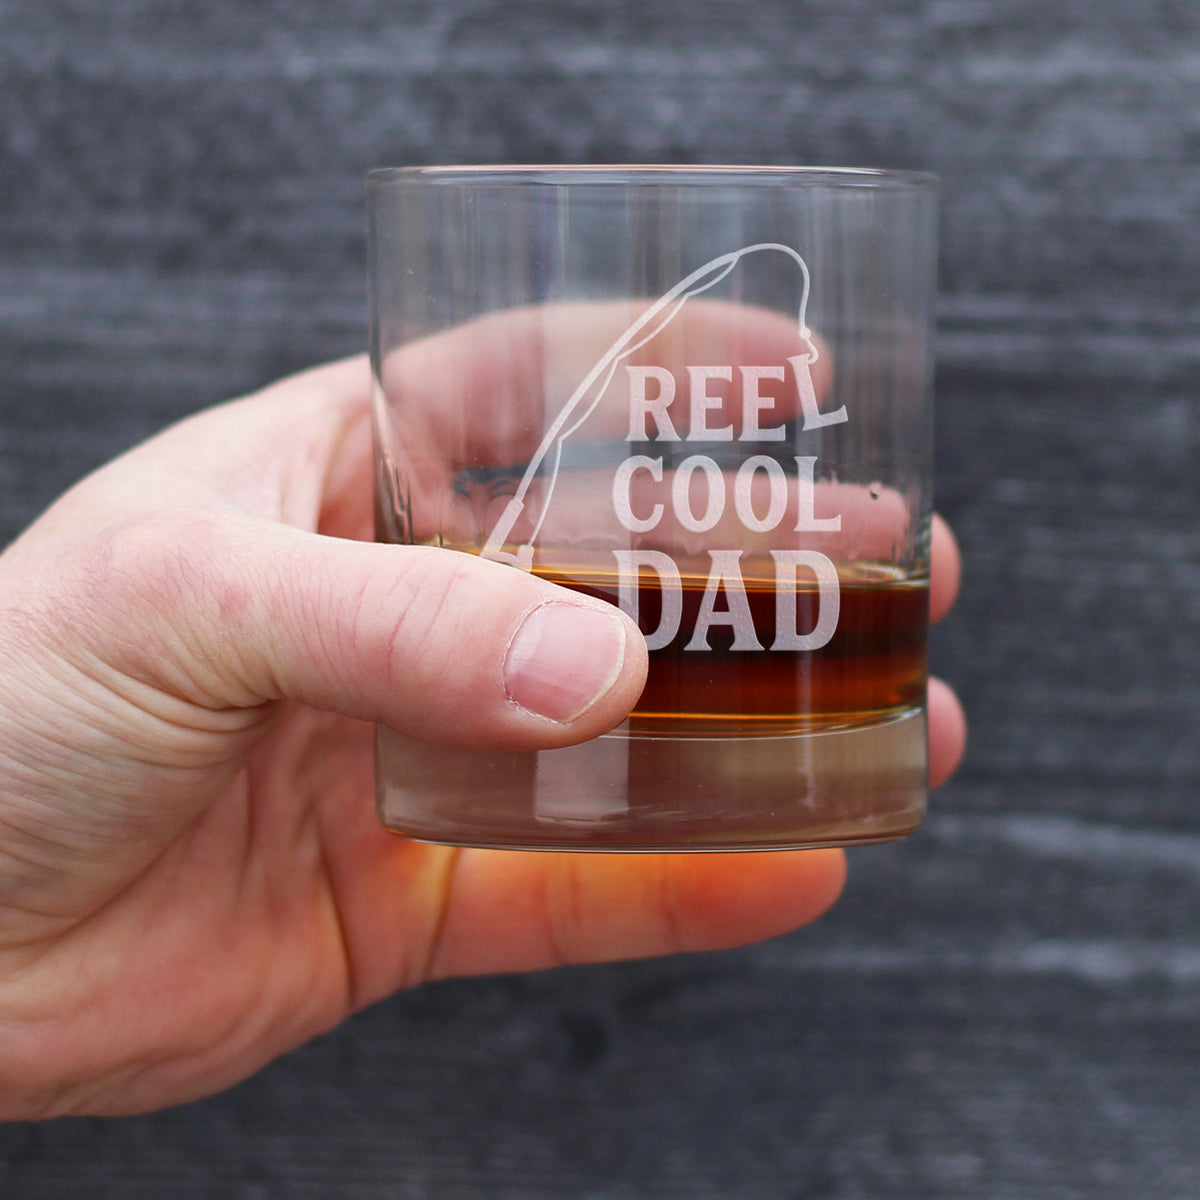 Reel Cool Dad - Funny Whiskey Rocks Glass - Fishing Gifts for Fathers - Engraved 10.25 oz Glasses - Fun Fish Cups